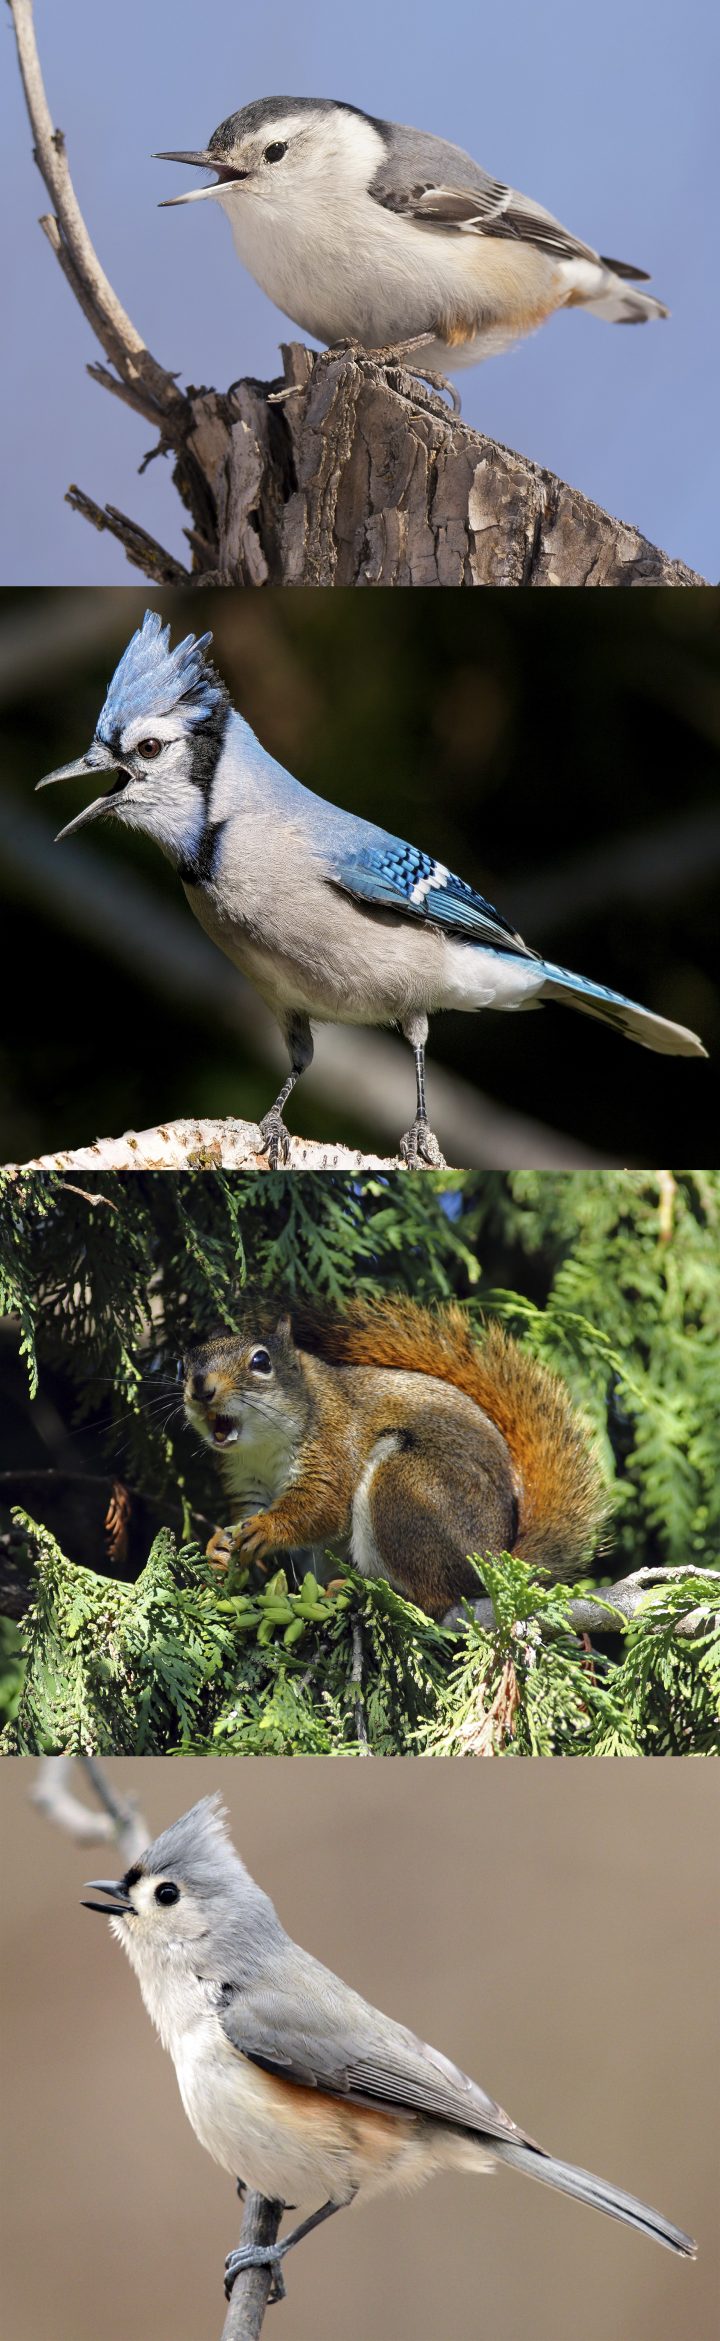 More than 50 different species will respond to a chickadee’s alarm call. The woods are wired by these alarm call networks, which allow various species of birds and small mammals to exchange information about a hawk or an owl. In the East and the West, the specific members of the alarm call network may differ but the acoustic properties of how alarm calls are transmitted are similar. Photos (from top to bottom): White-breasted Nuthatch by Kirchmeier, Blue Jay by Larry Eiden, American Red Squirrel by Guy Lichter, Tufted Timouse by Deborah E. Bifulco.